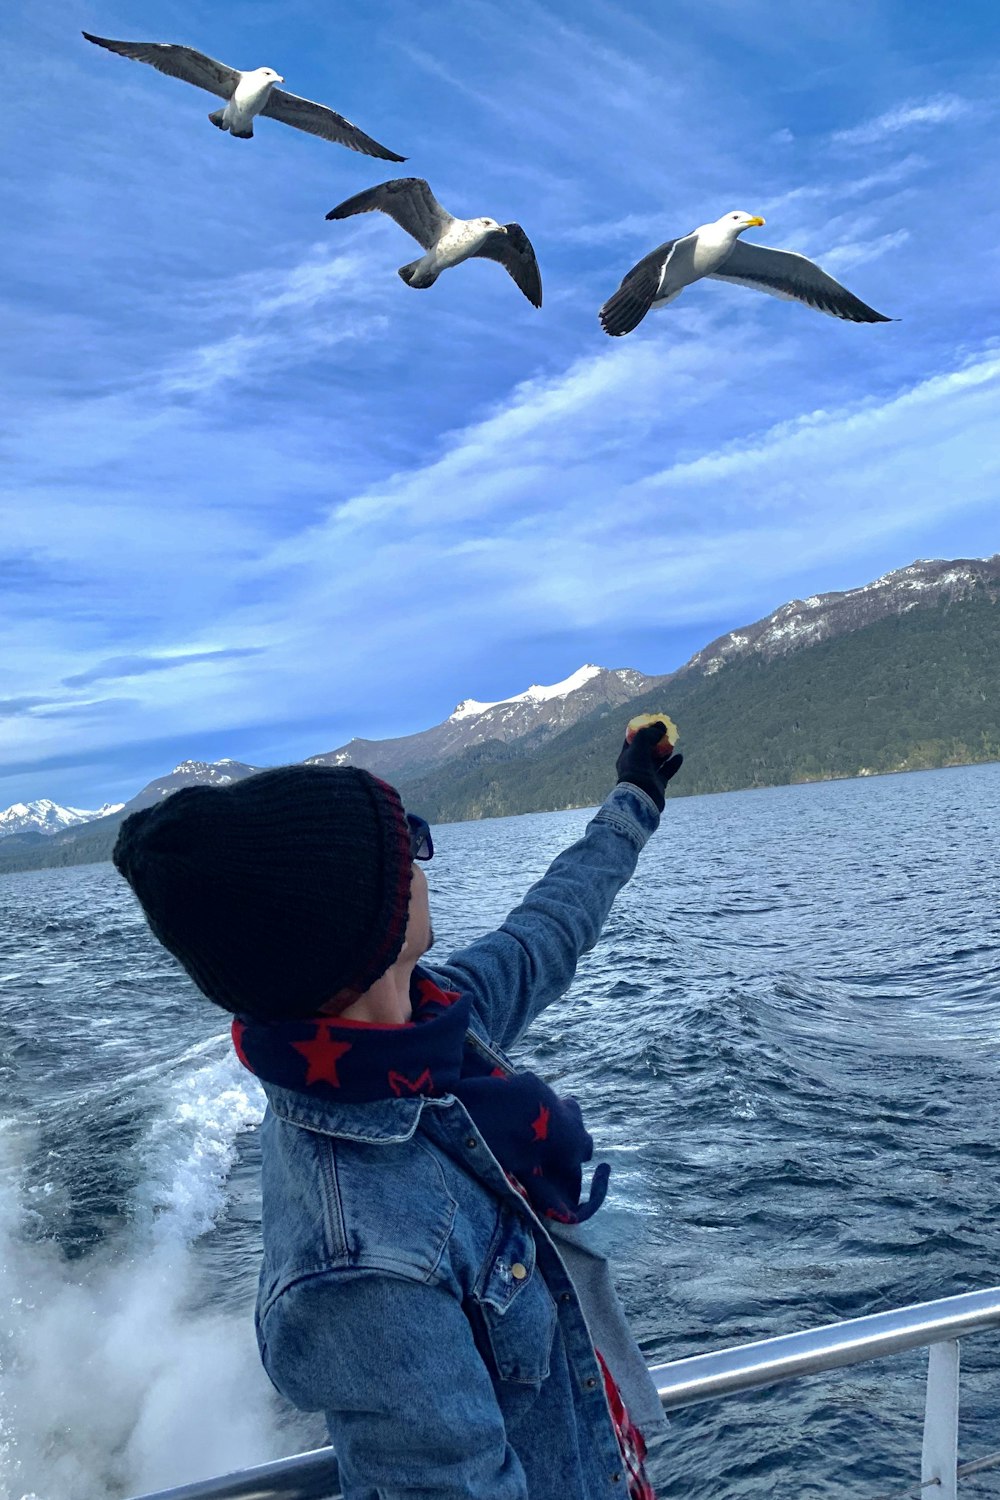 a person on a boat looking at seagulls in the sky